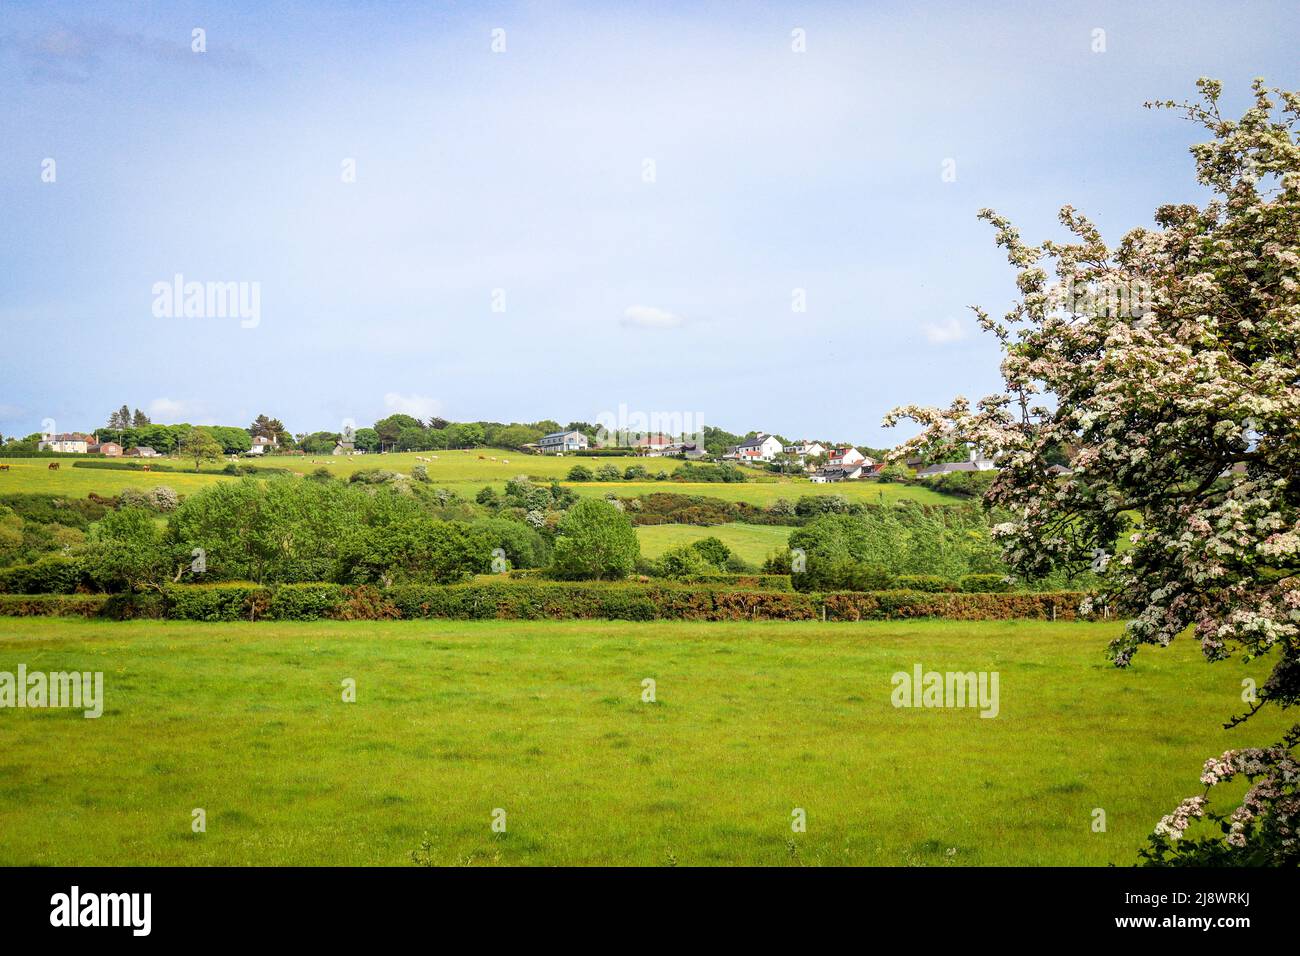 Homes / house on a hill near Thurstaston, Wirral / Open Countryside with Blossom Tree Stock Photo